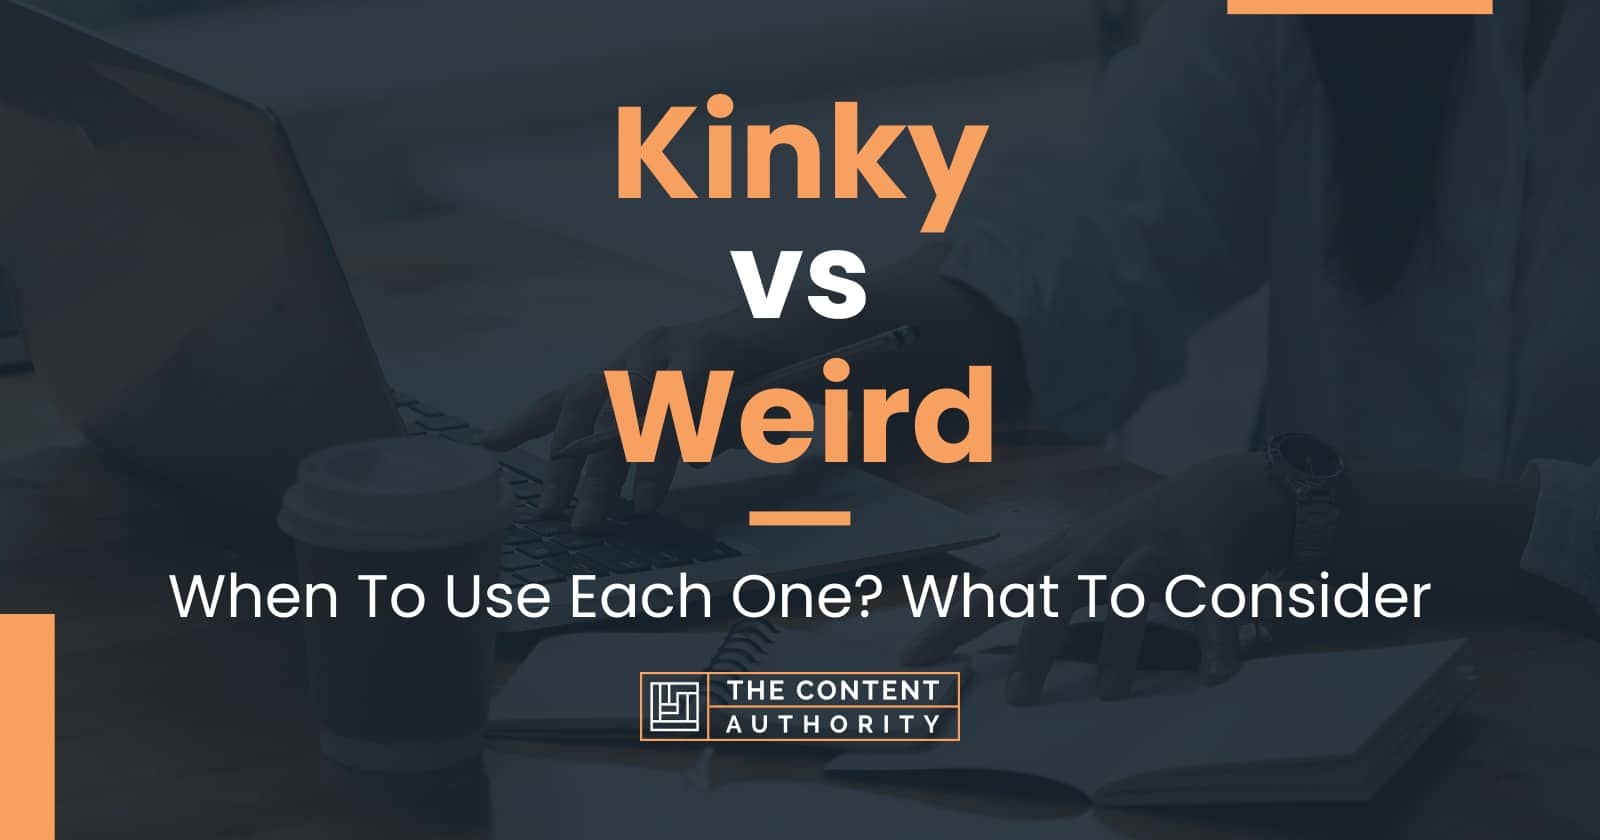 Kinky Vs Weird When To Use Each One What To Consider